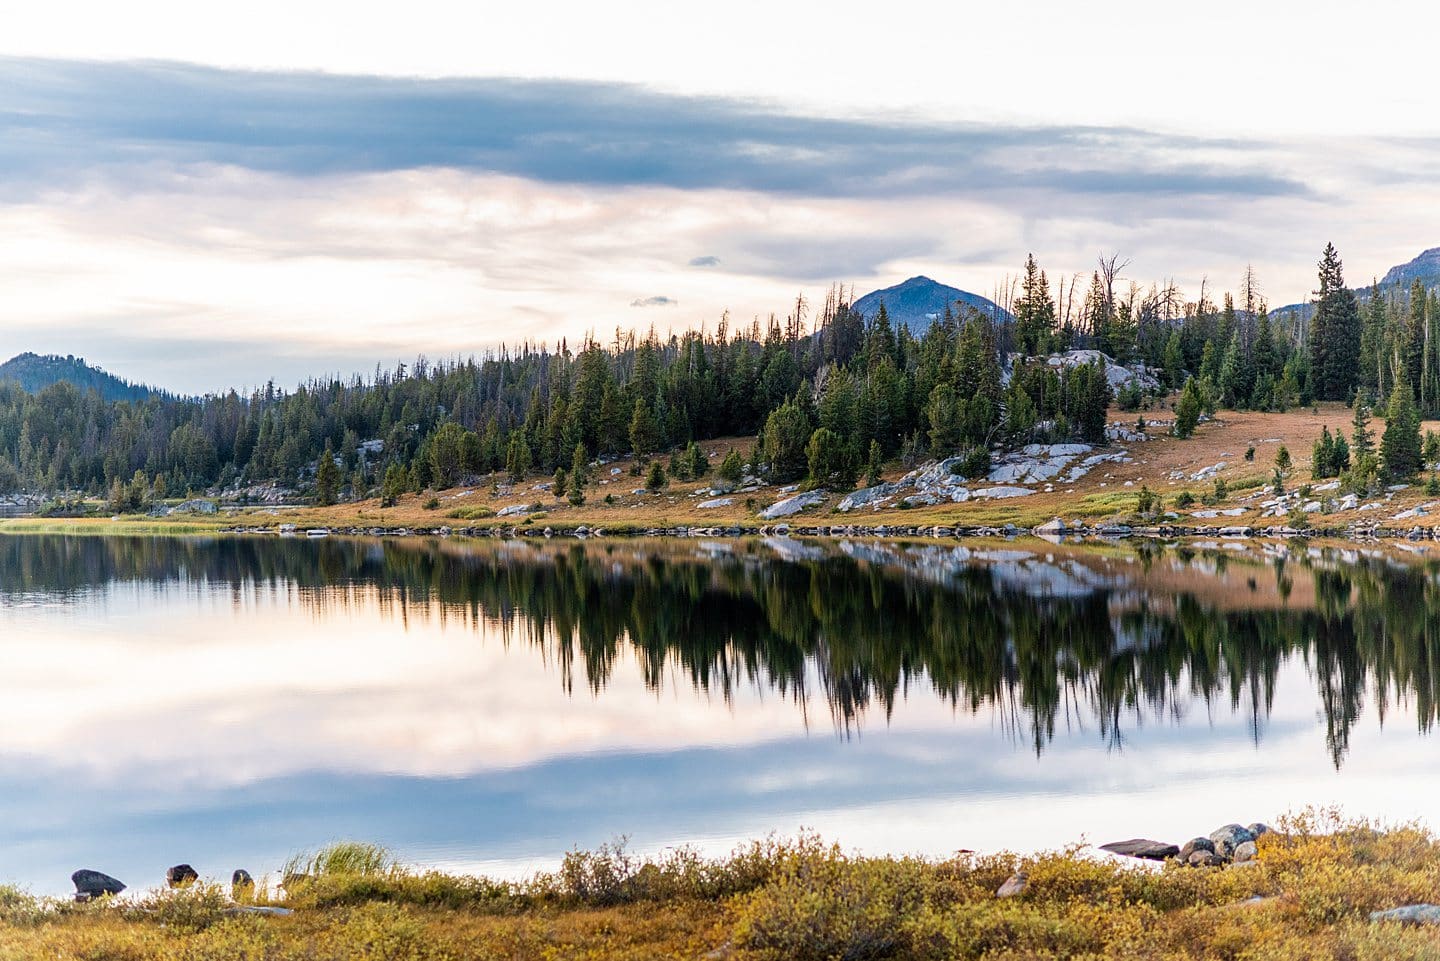 One of America’s Most Scenic Drives: Photo Highlights of Beartooth Highway in Late September